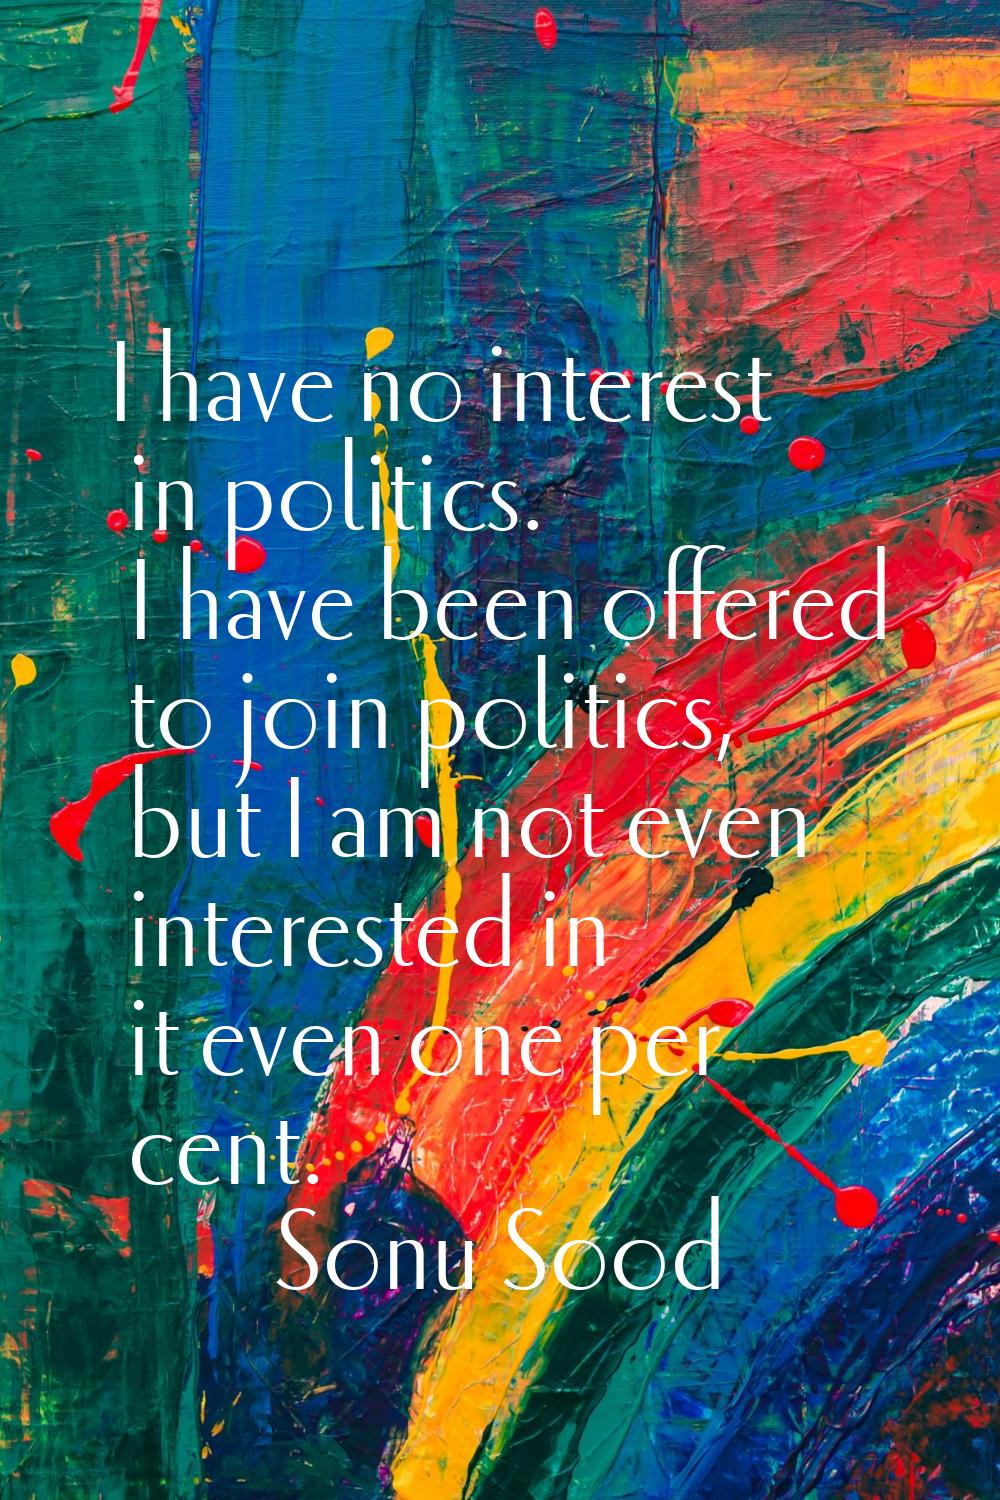 I have no interest in politics. I have been offered to join politics, but I am not even interested 